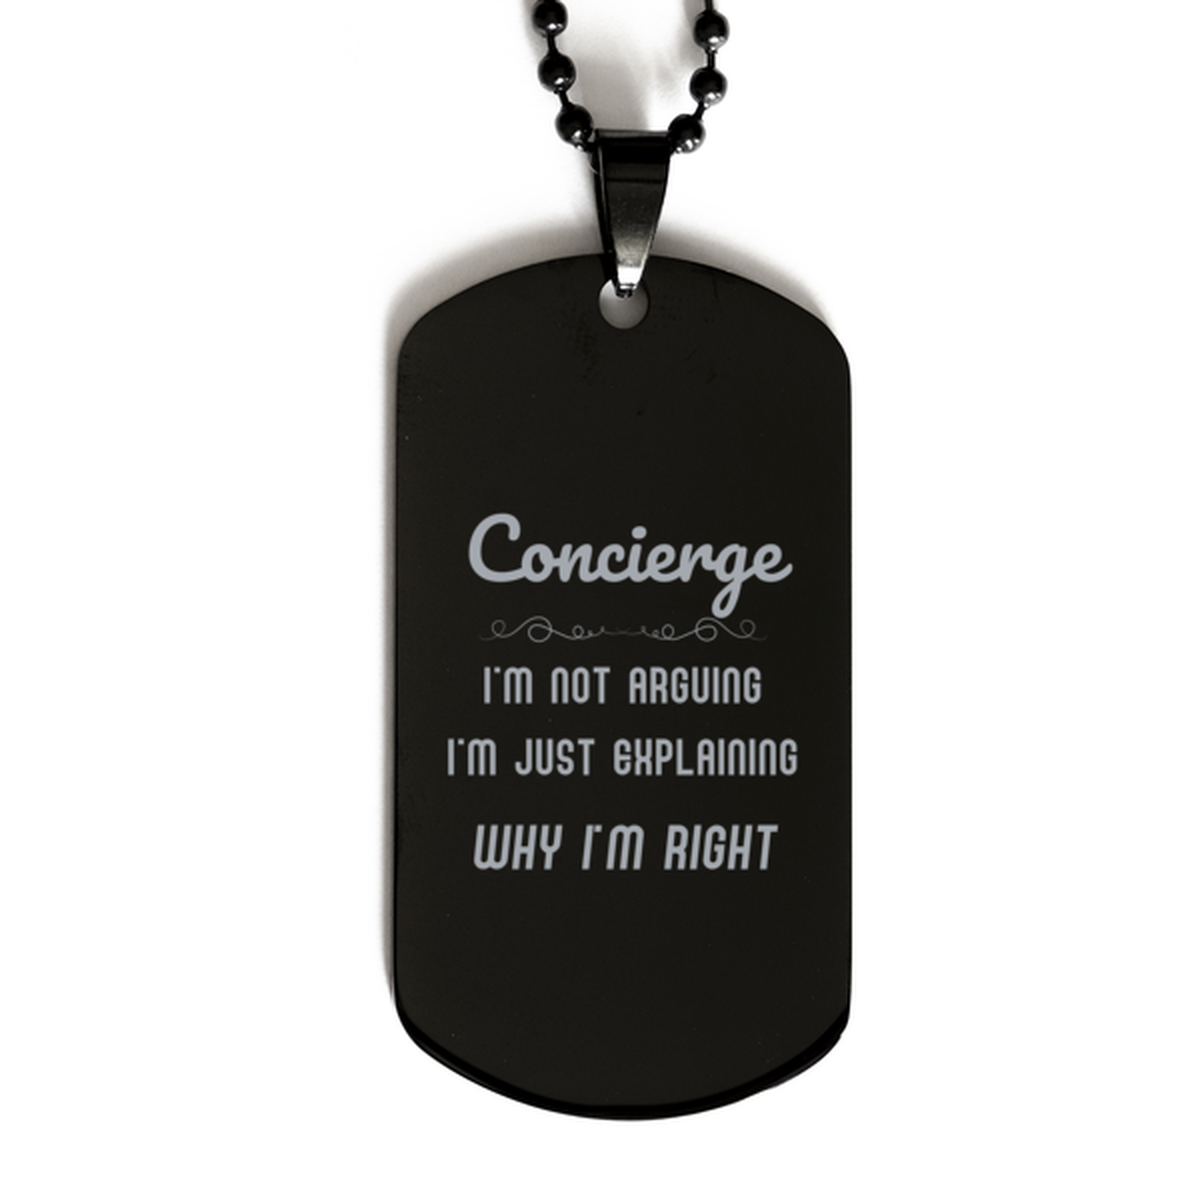 Concierge I'm not Arguing. I'm Just Explaining Why I'm RIGHT Black Dog Tag, Funny Saying Quote Concierge Gifts For Concierge Graduation Birthday Christmas Gifts for Men Women Coworker